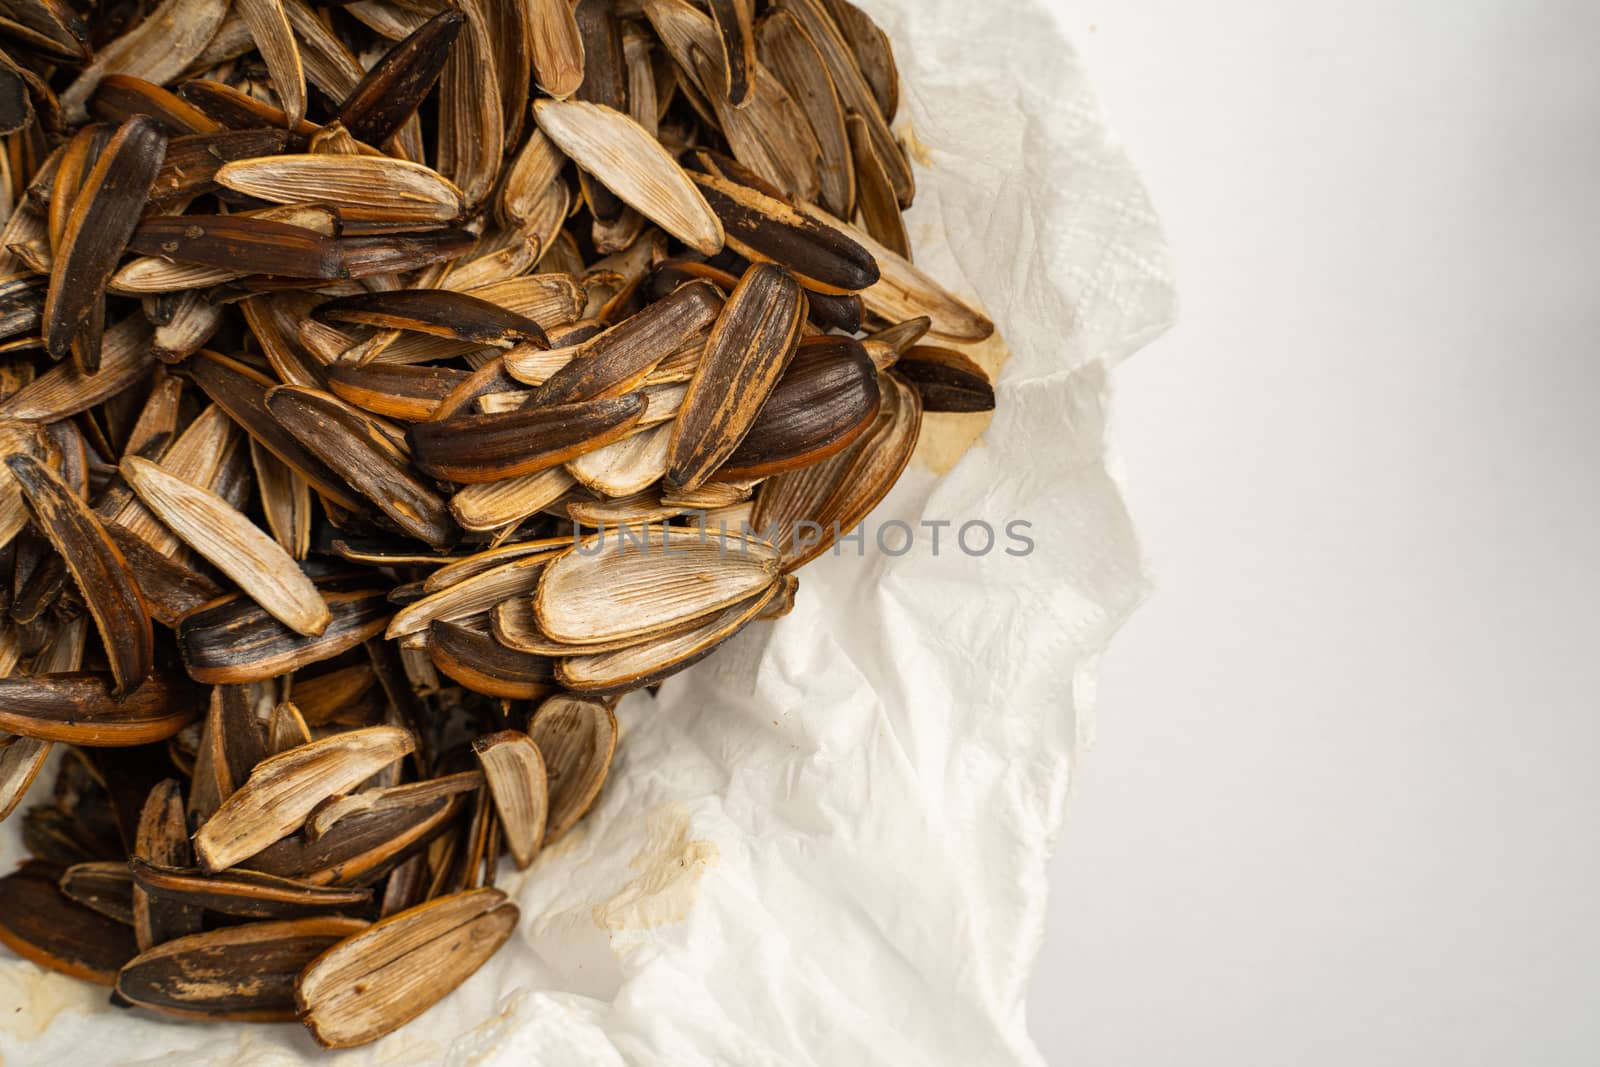 The Sunflower seed shells. Background empty Sunflower seed shells